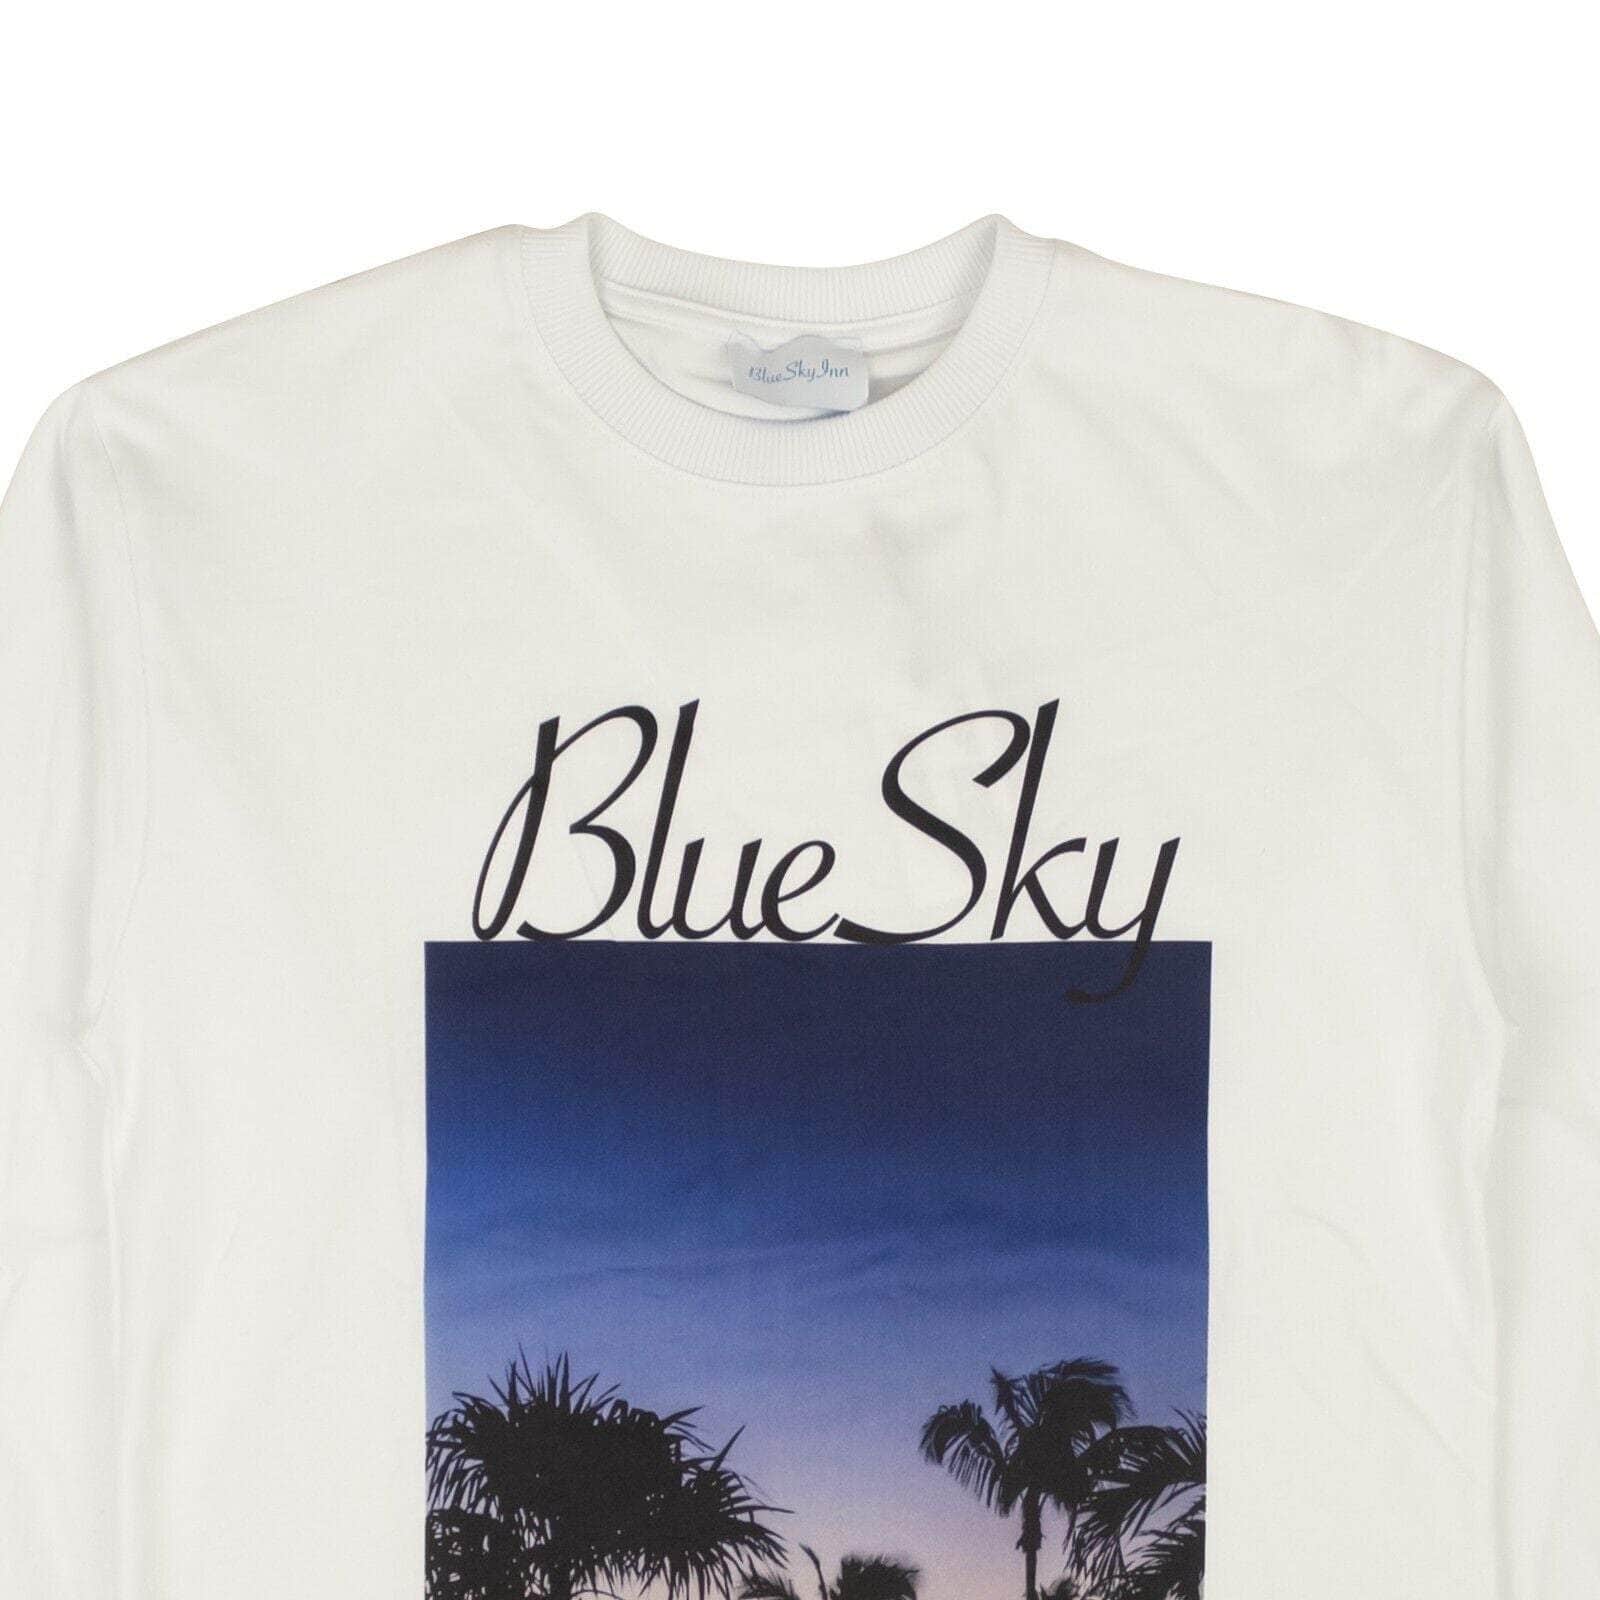 Blue Sky Inn blue-sky-inn, channelenable-all, chicmi, couponcollection, gender-mens, main-clothing, mens-shoes, size-s, under-250 S White Ipanema Sunrise Long Sleeve T-Shirt BSI-XTSH-0017/S BSI-XTSH-0017/S